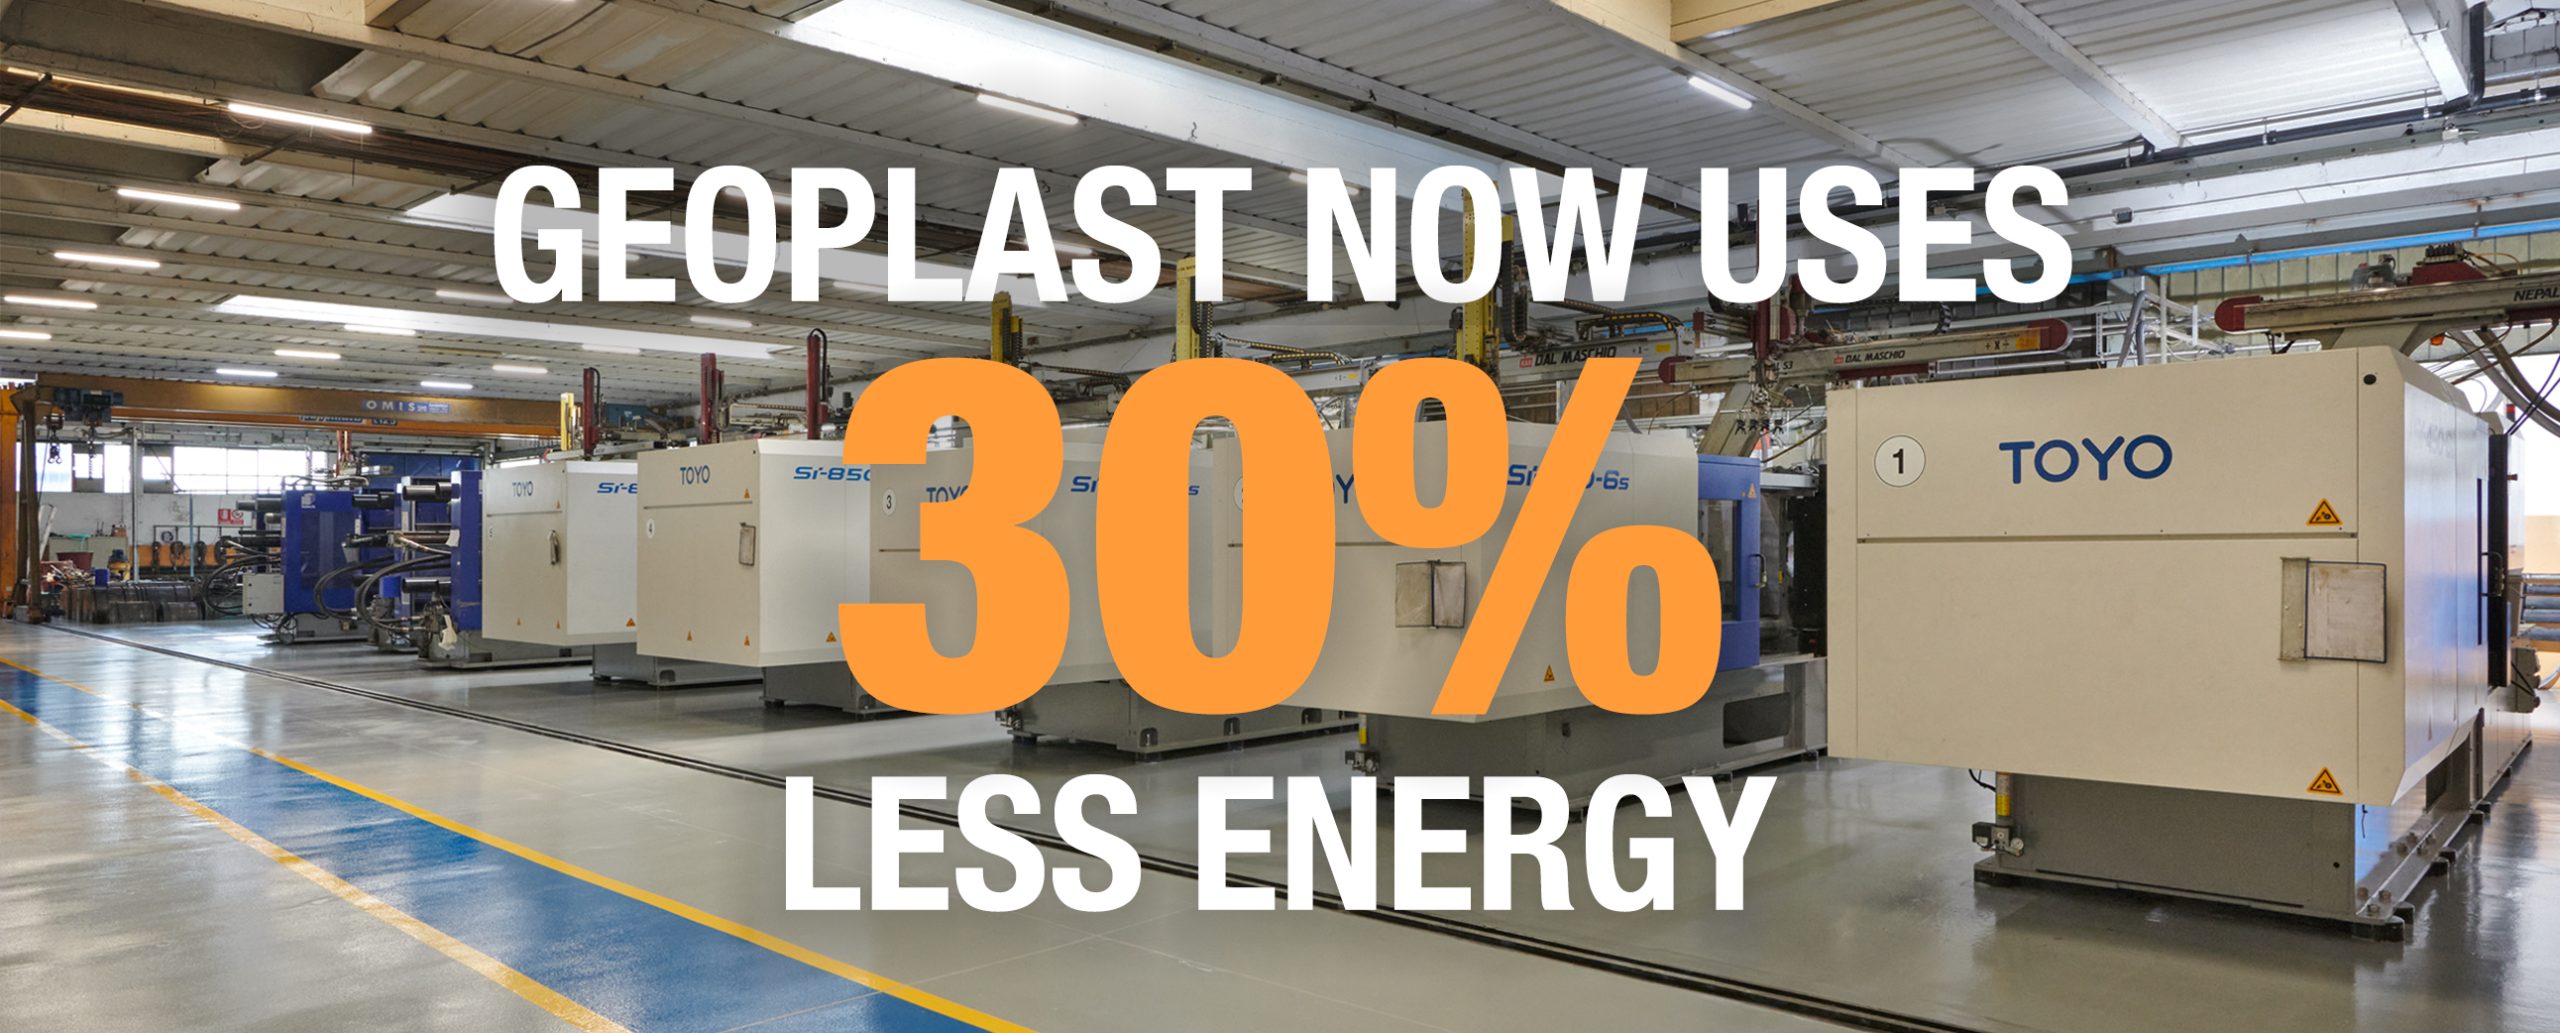 Geoplast manufacturing reduces energy needs by 30% with full-electric machines